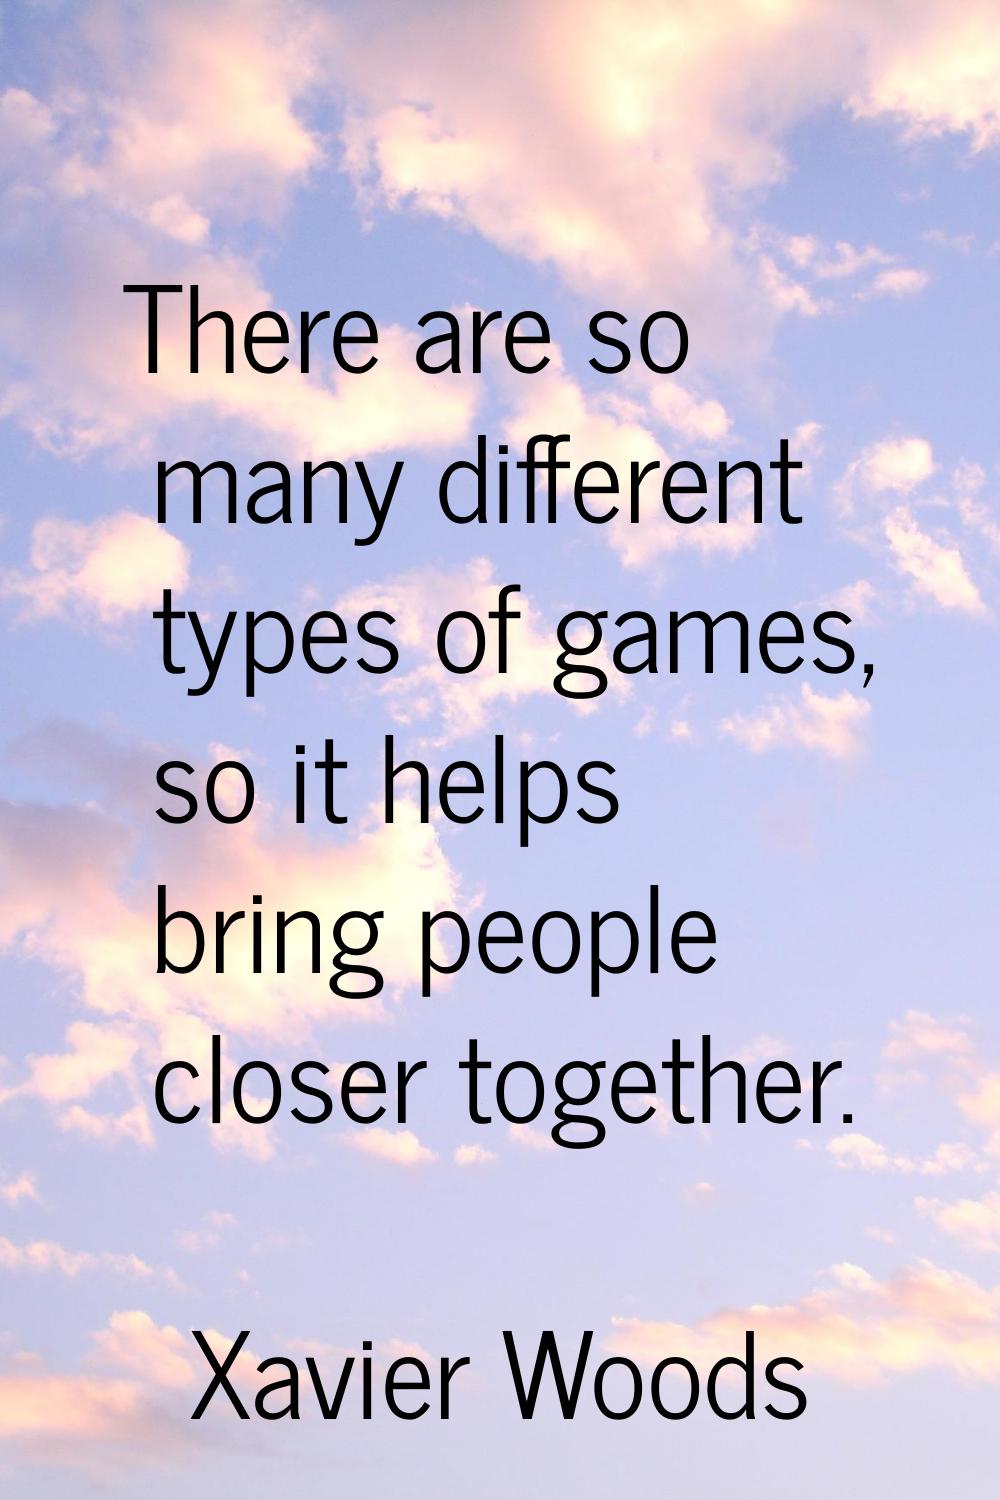 There are so many different types of games, so it helps bring people closer together.